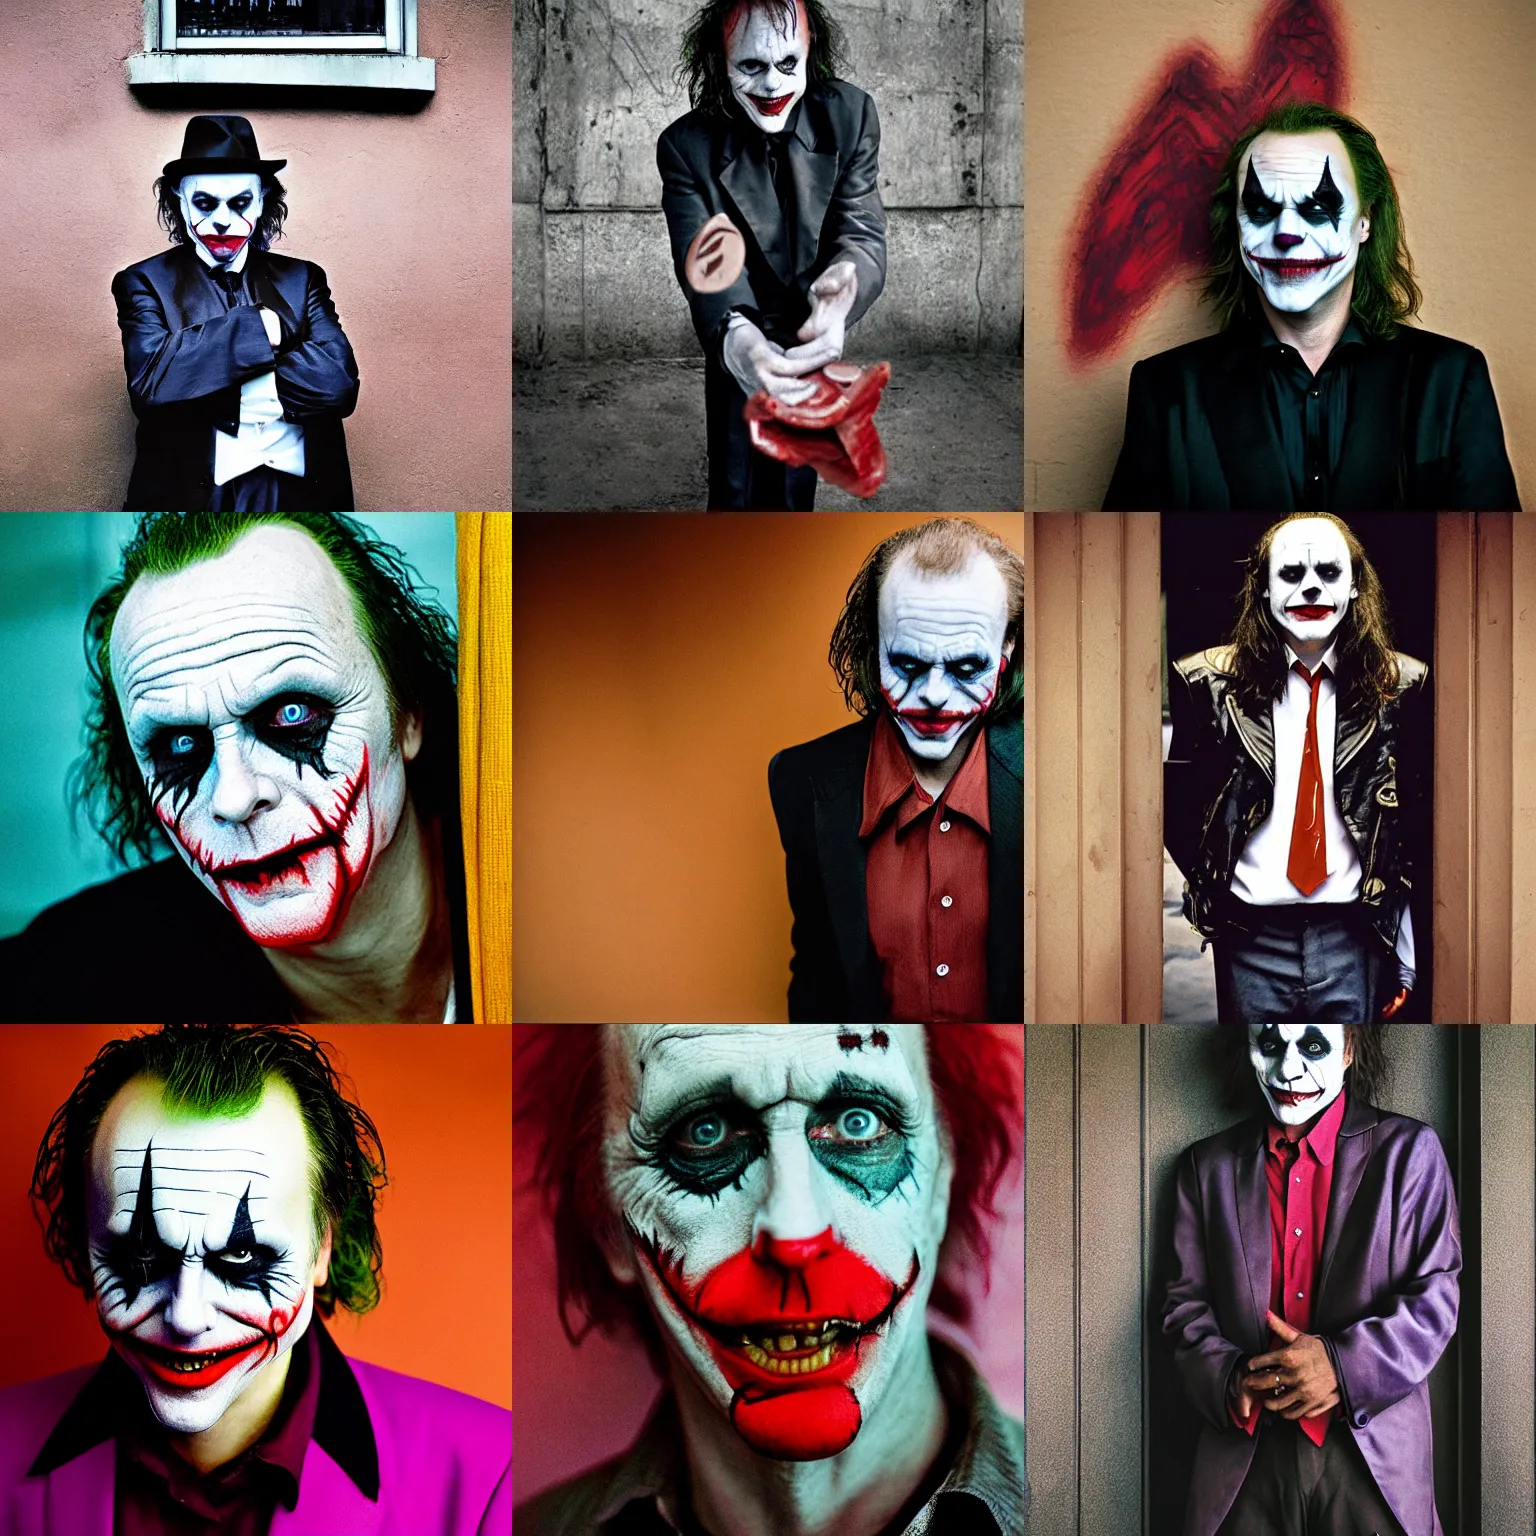 Prompt: portrait of lars ulrich, as the joker, by steve mccurry